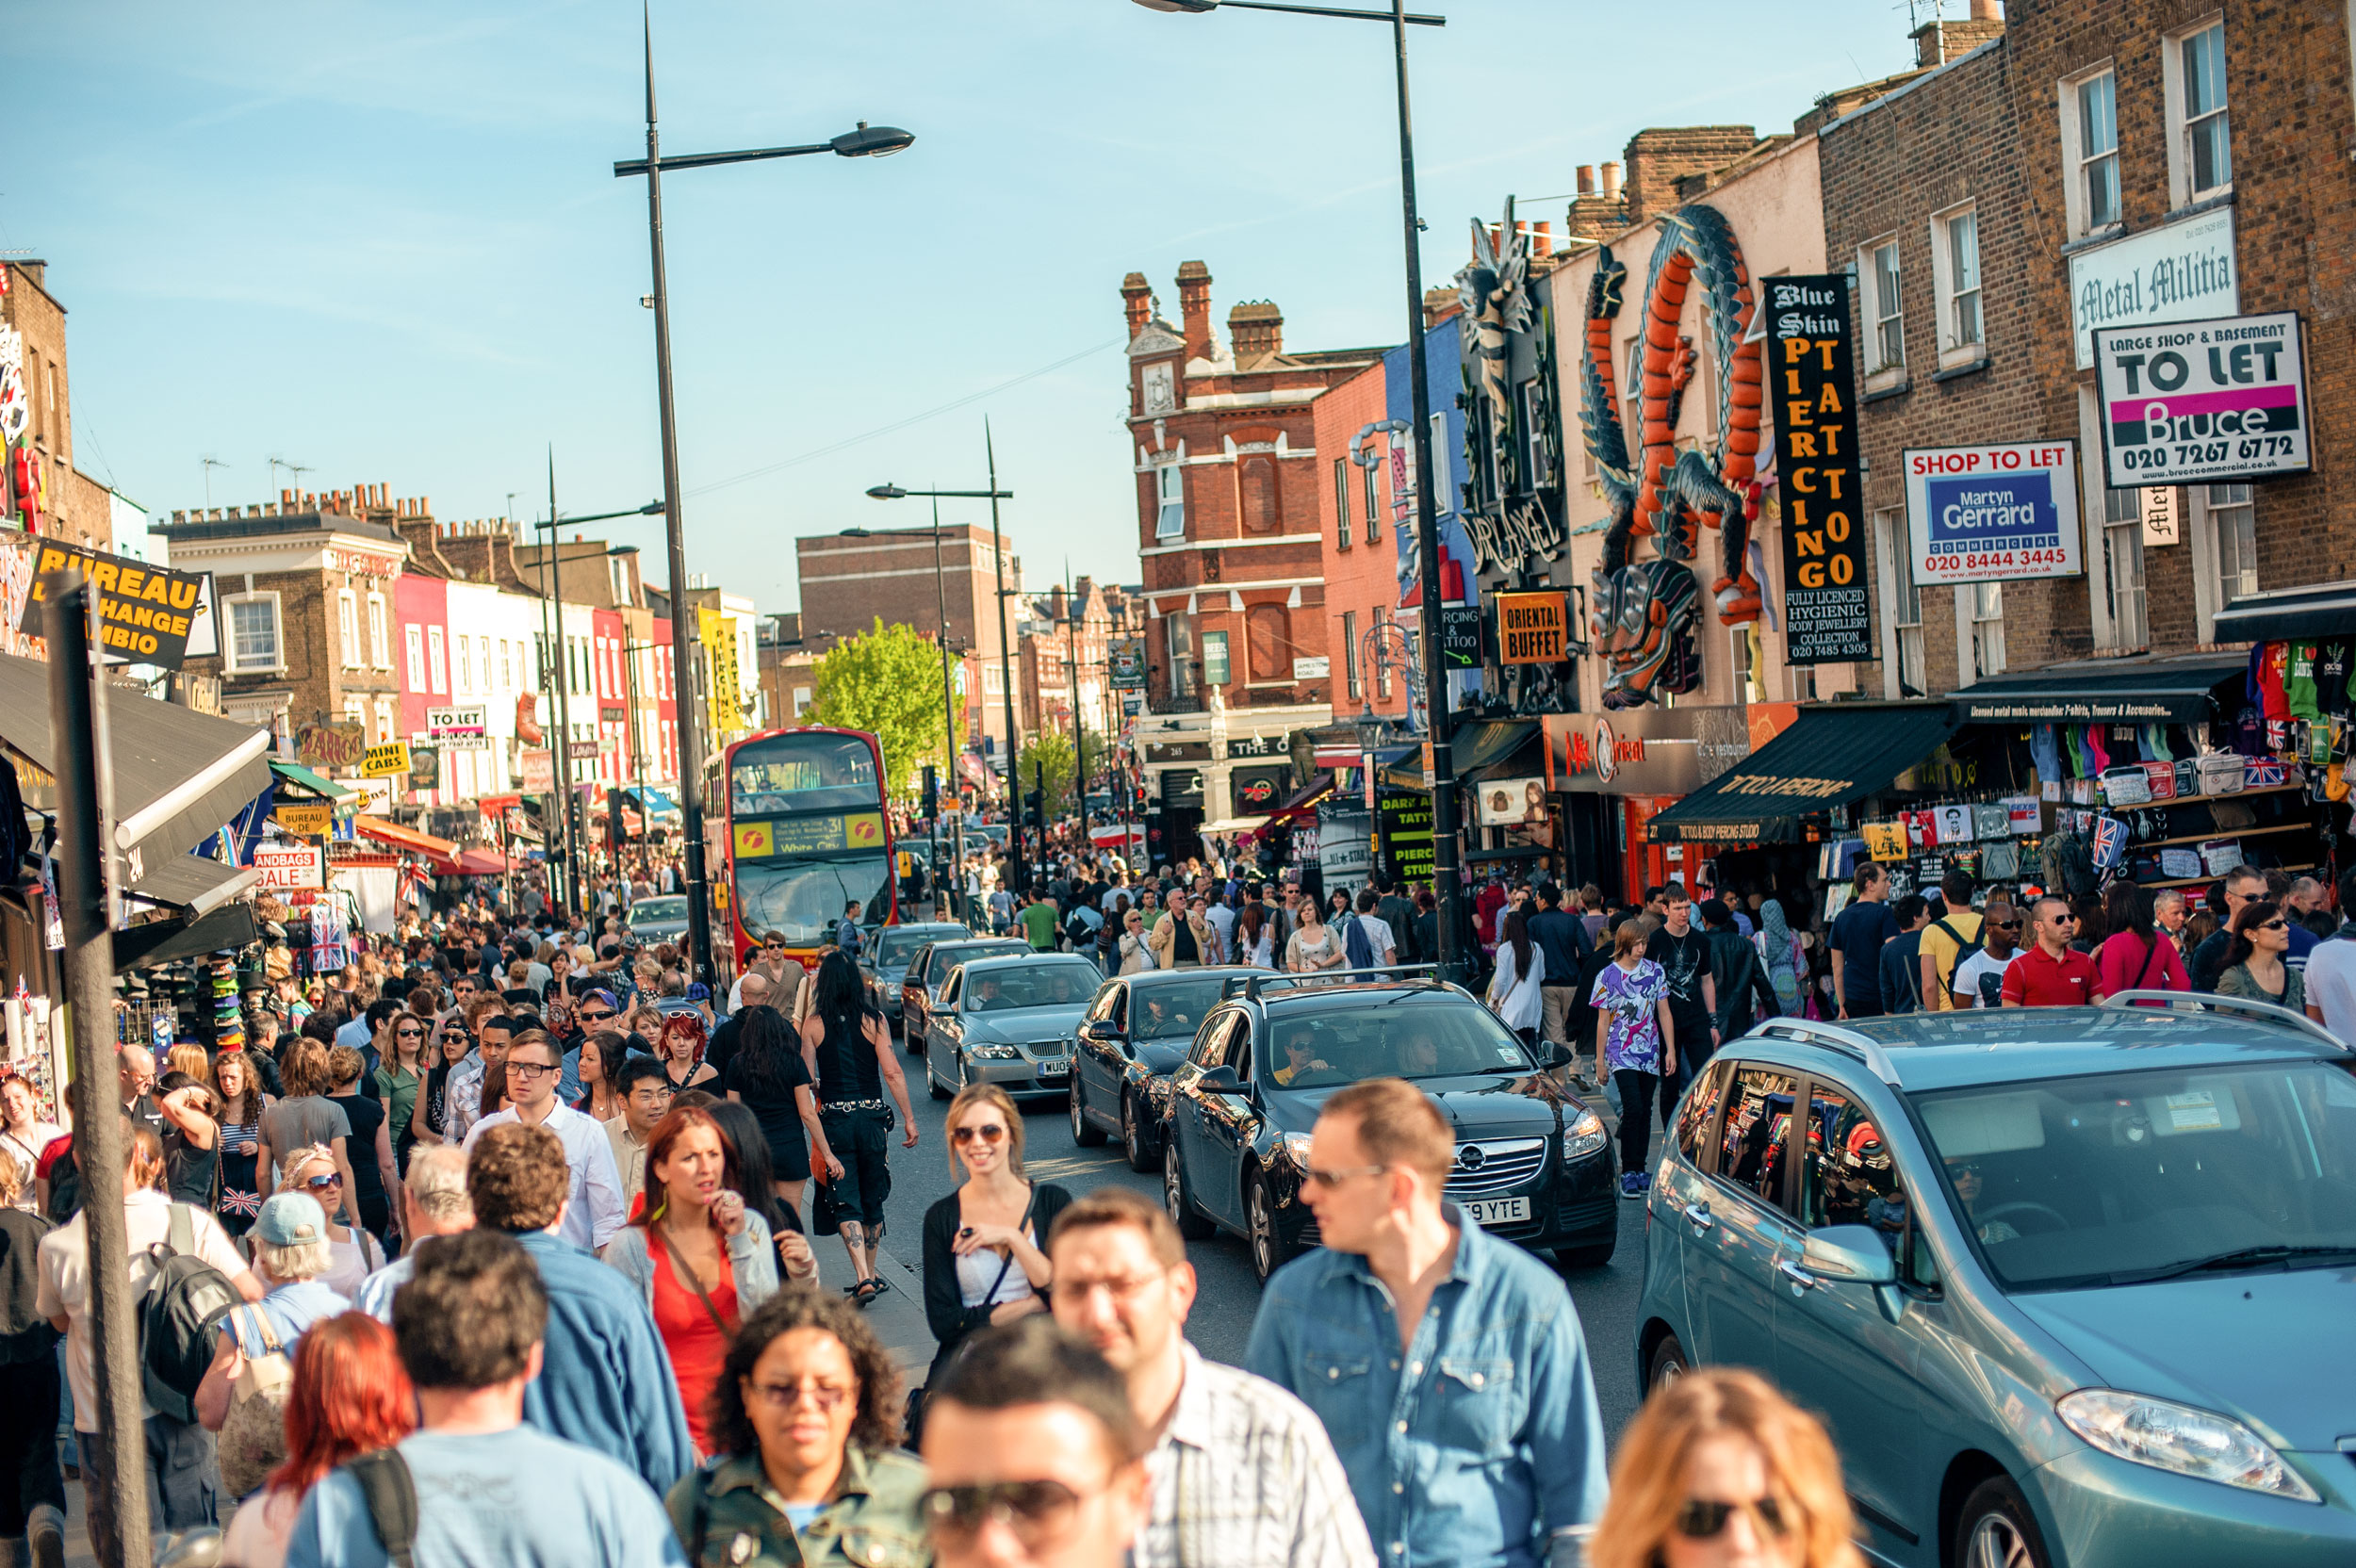 A-CROWDED-BUSY-CAMDEN-HIGH-STREET-IN-THE-SUMMER-IN-LONDON-UK